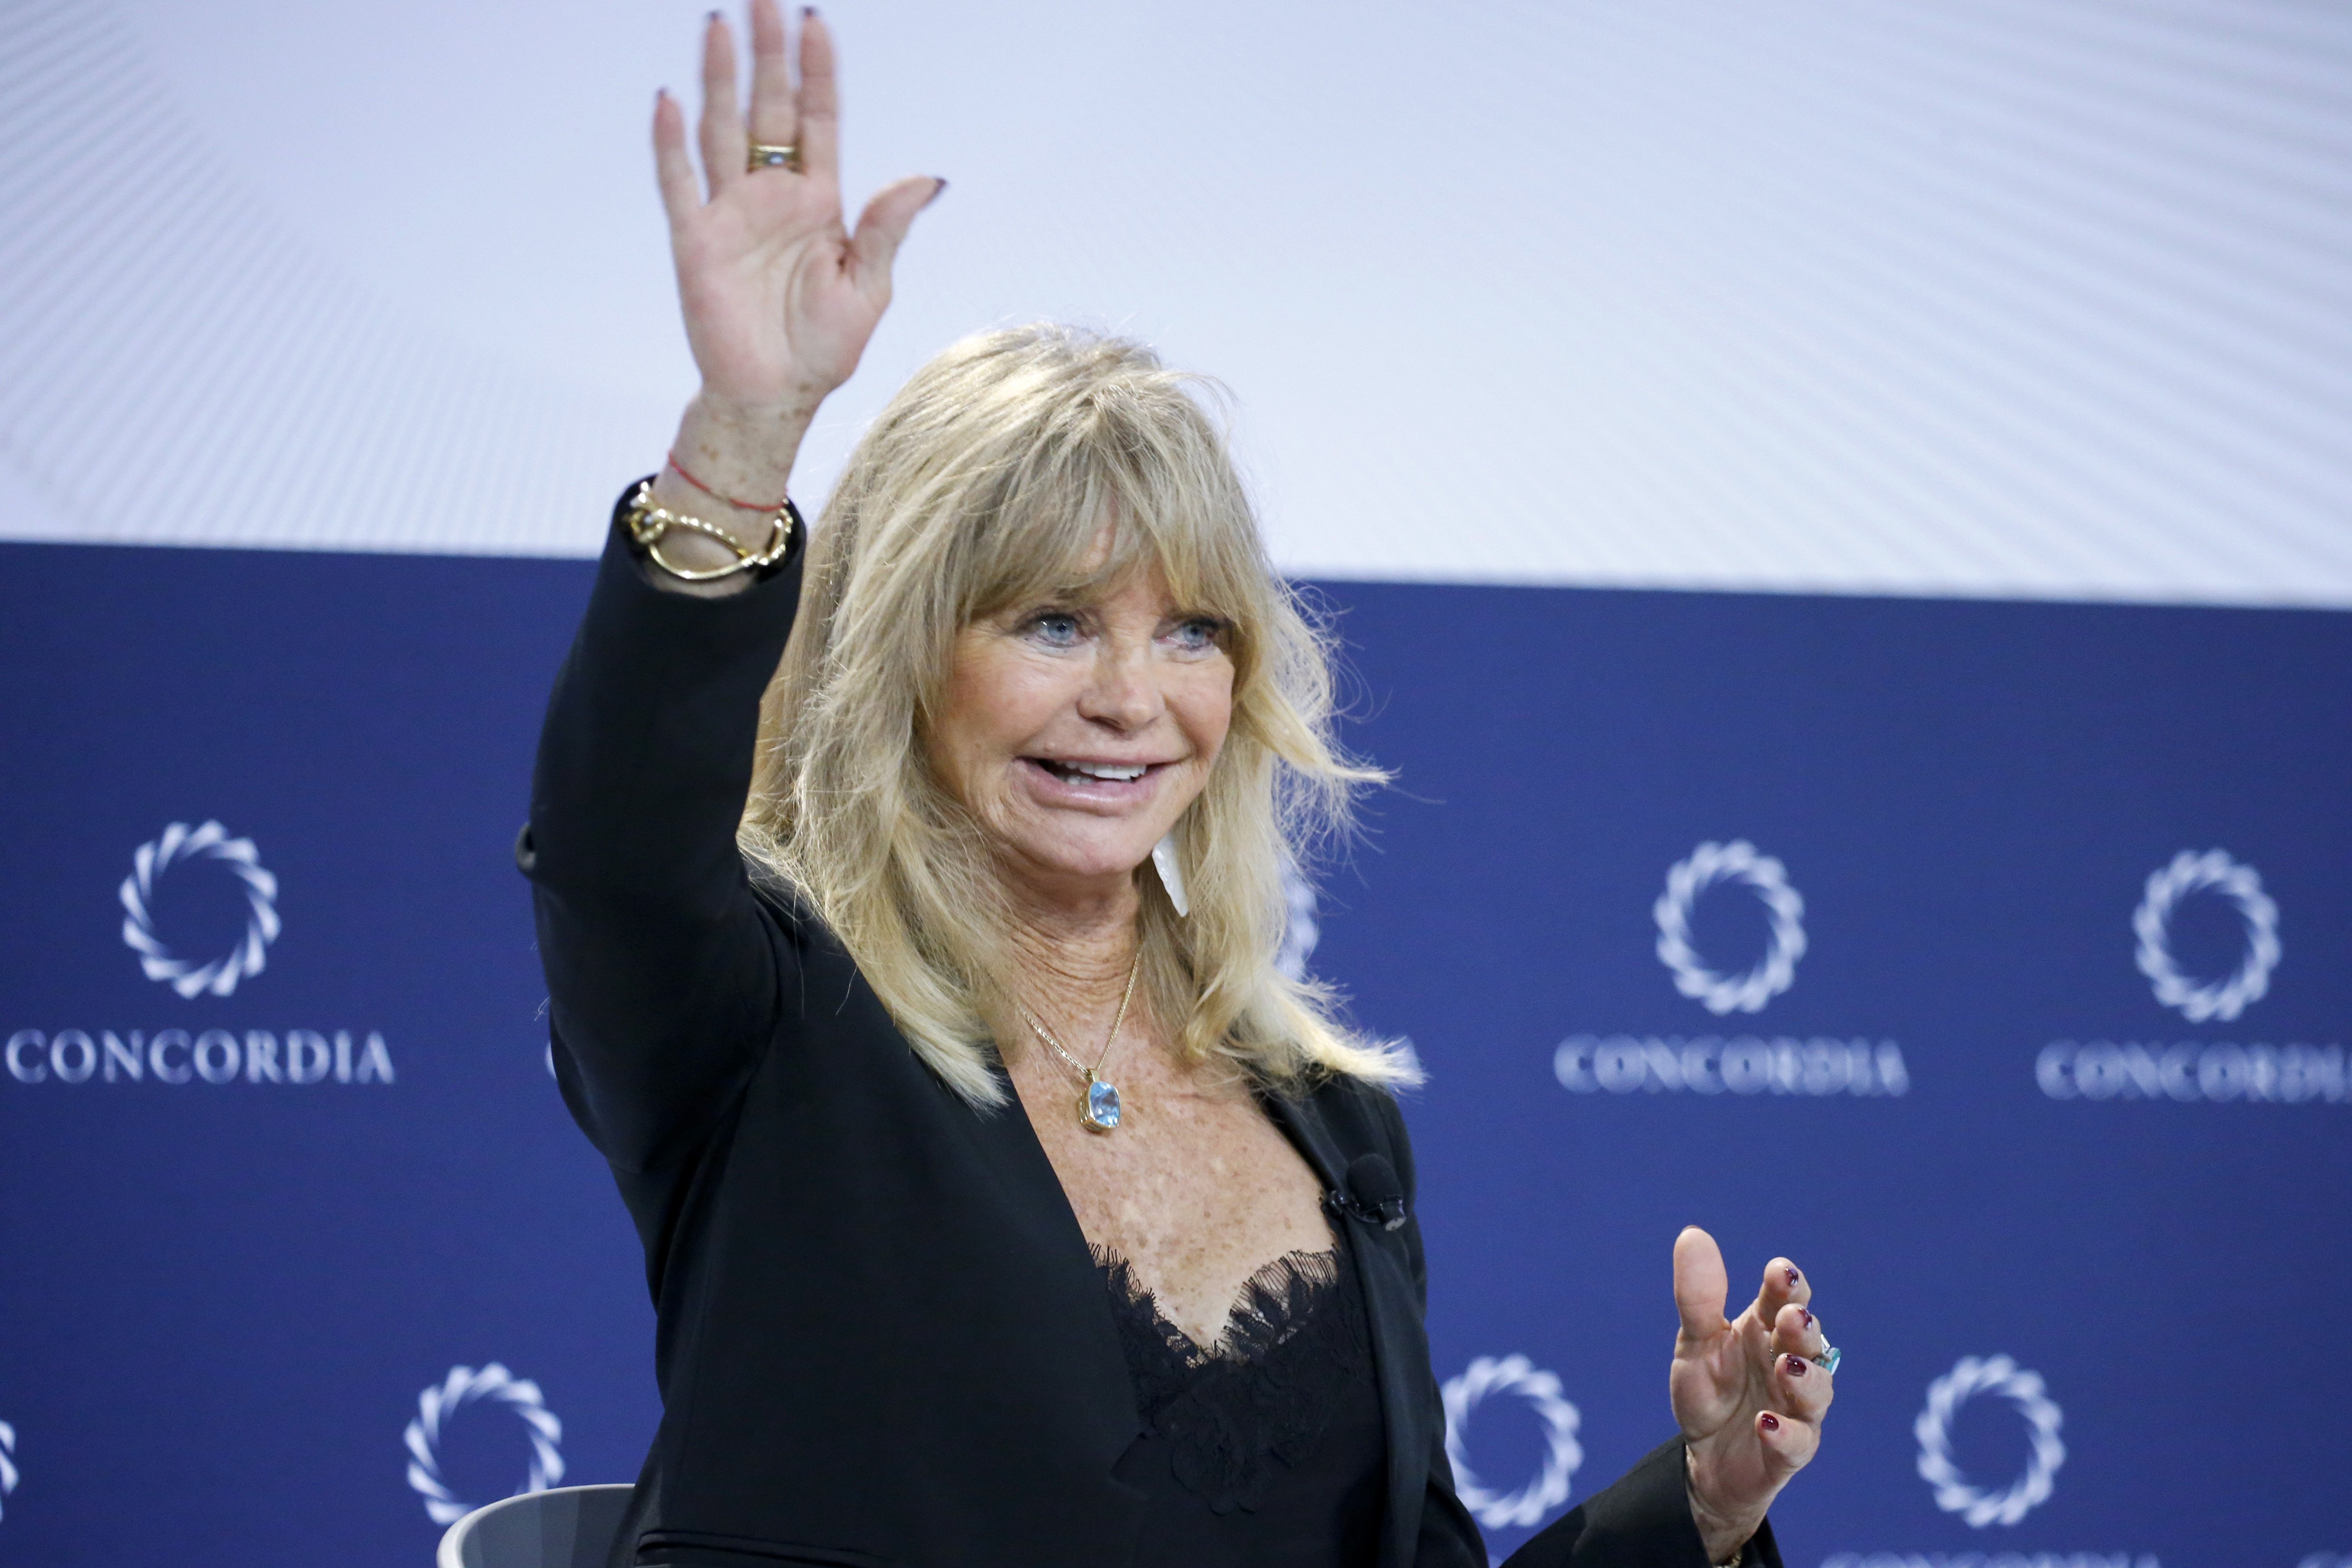 Goldie Hawn at Sheraton New York on September 20, 2022 in New York City | Source: Getty Images